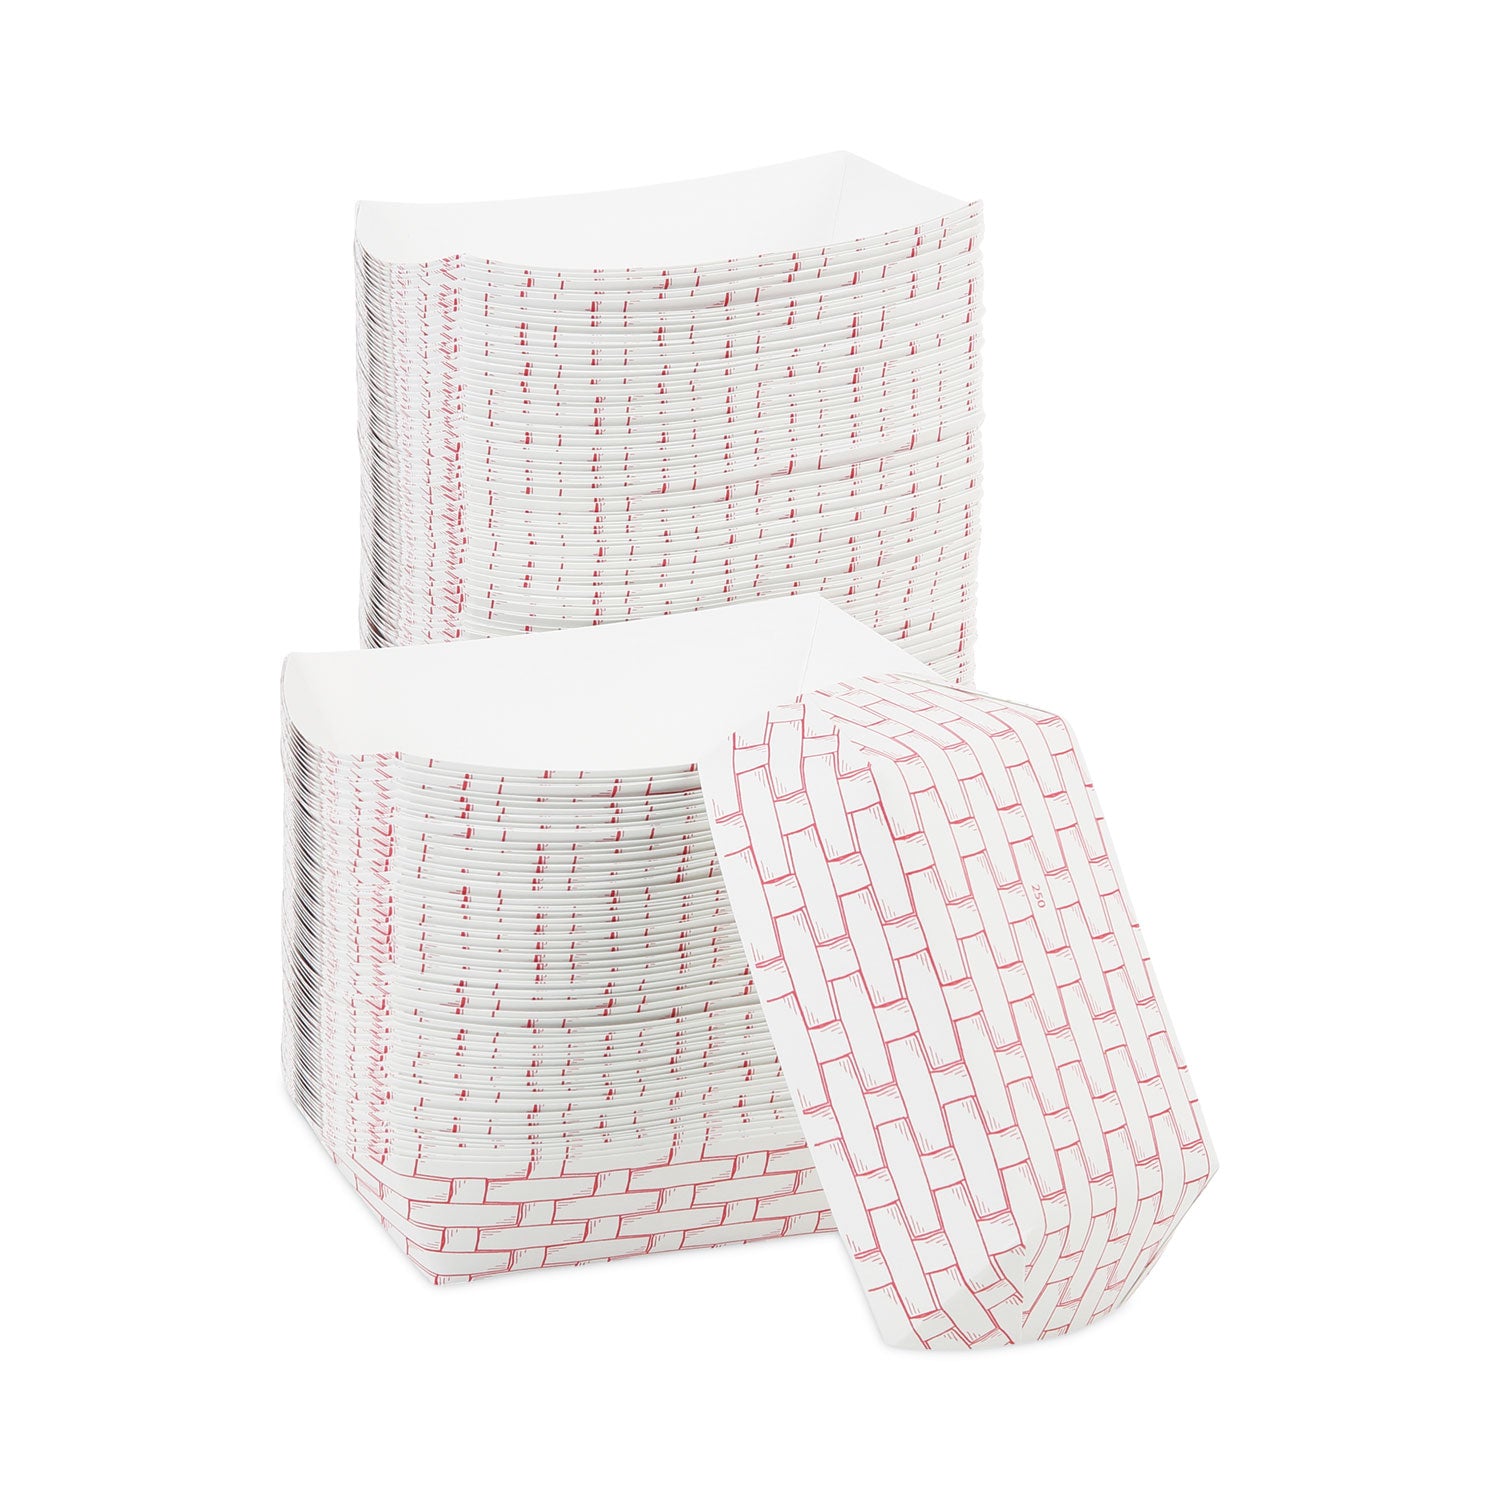 Paper Food Baskets, 2.5 lb Capacity, Red/White, 500/Carton - 